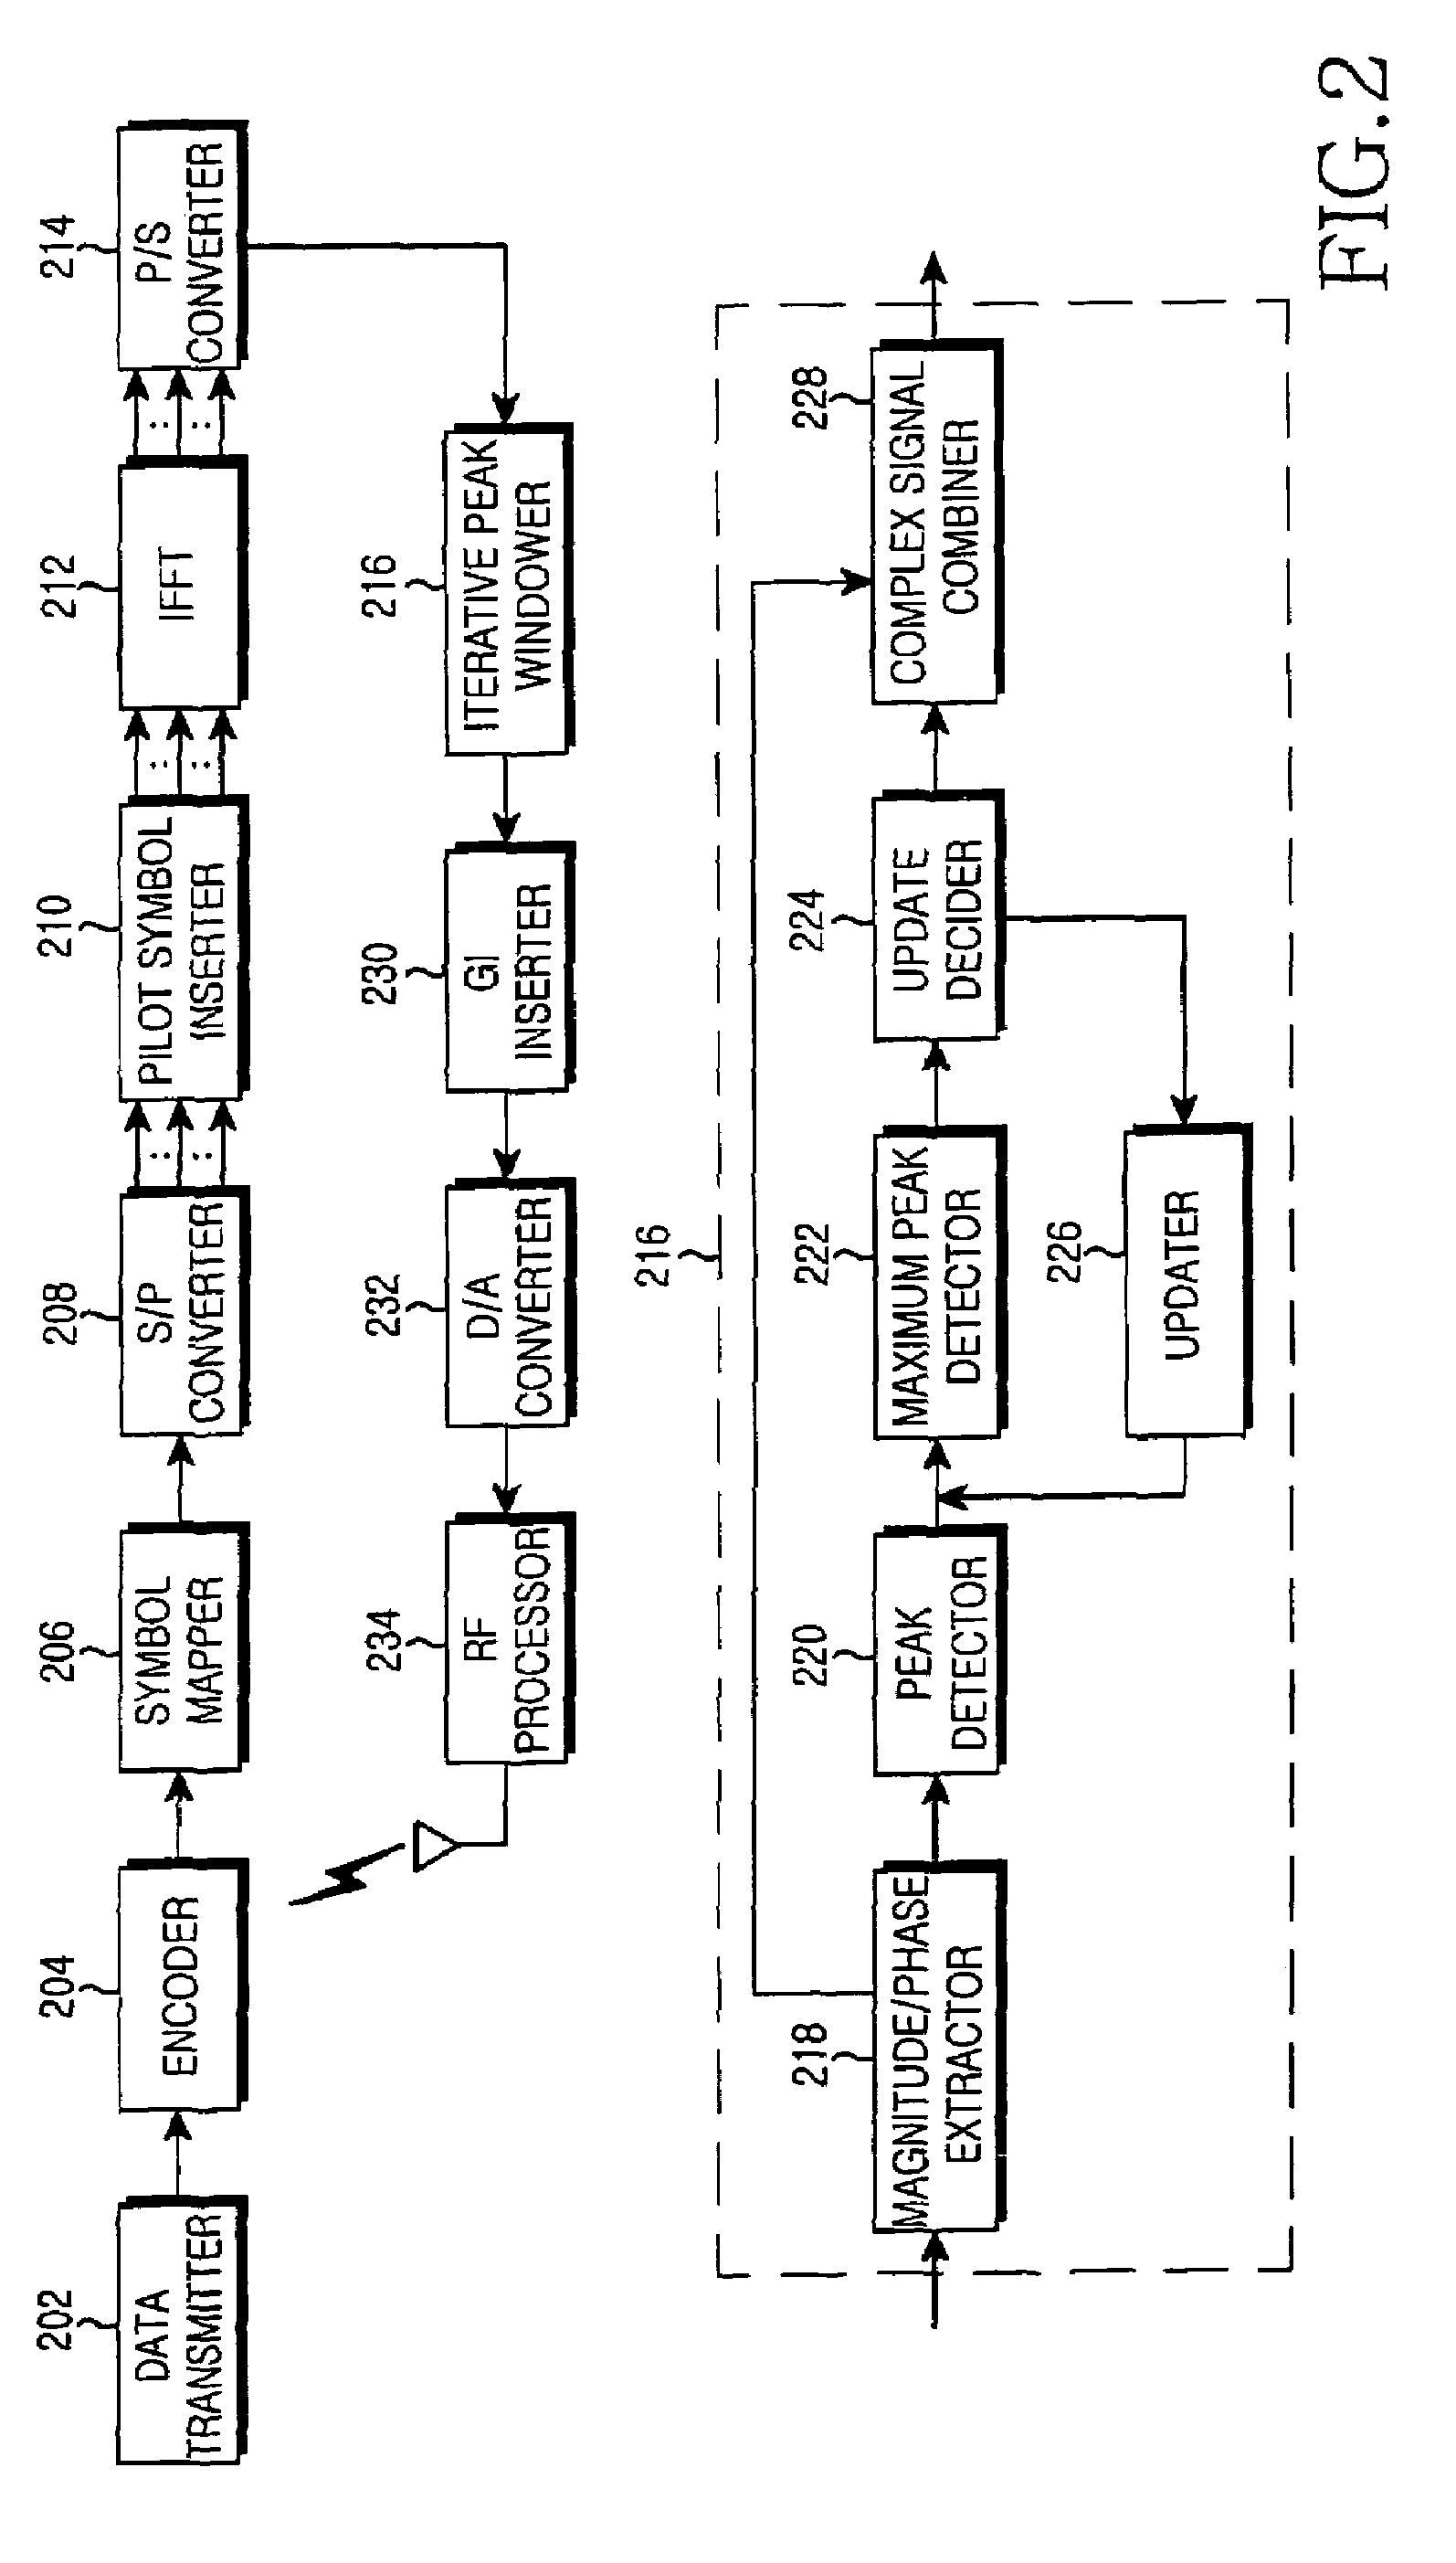 Apparatus and method for reducing peak-to-average power ratio in an OFDM communication system